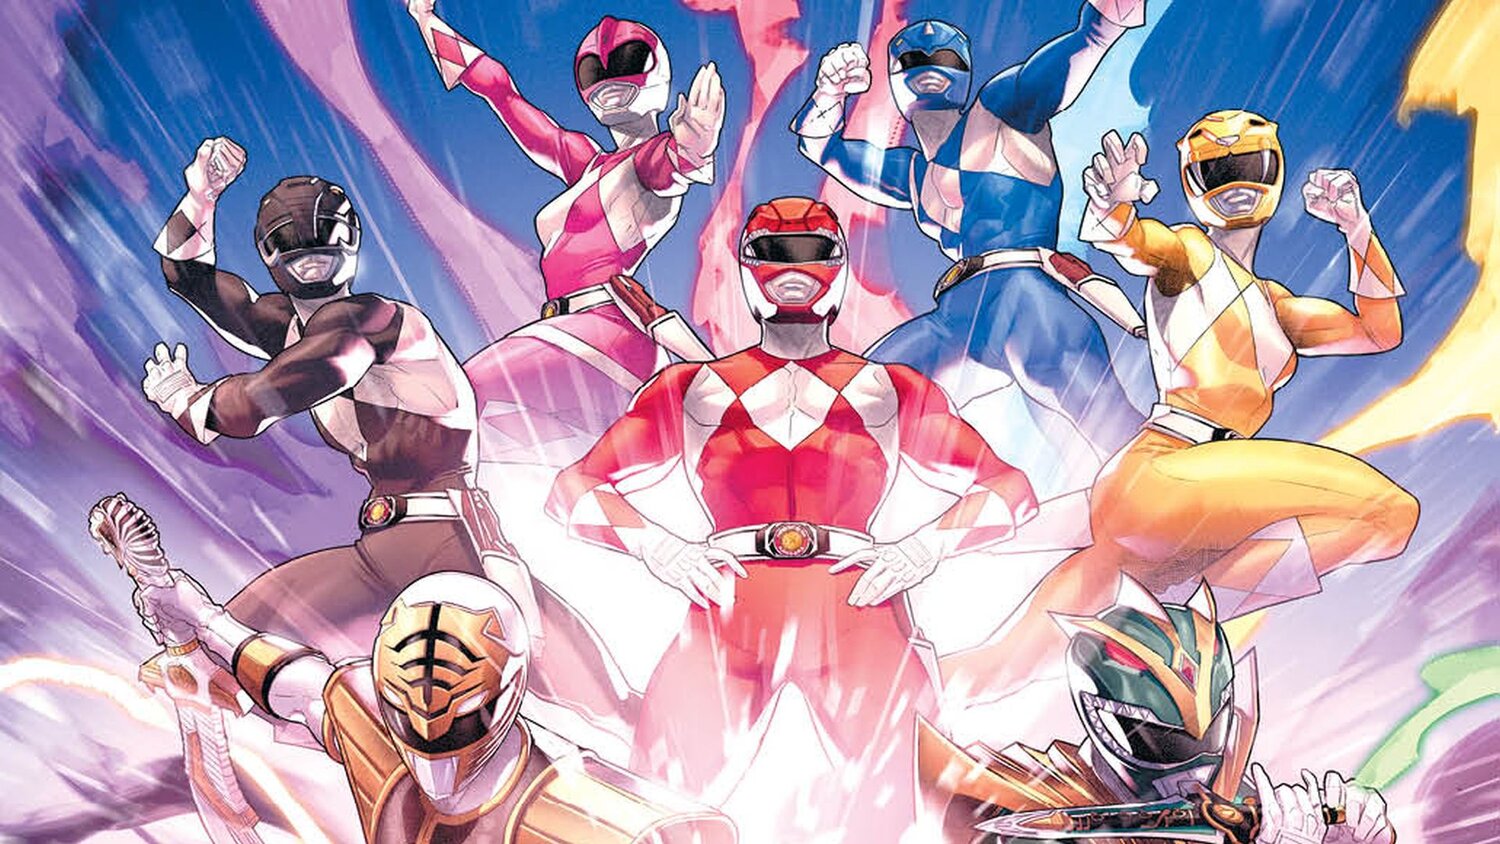 Let's Talk About MIGHTY MORPHIN POWER RANGERS #55 - GeekTyrant.